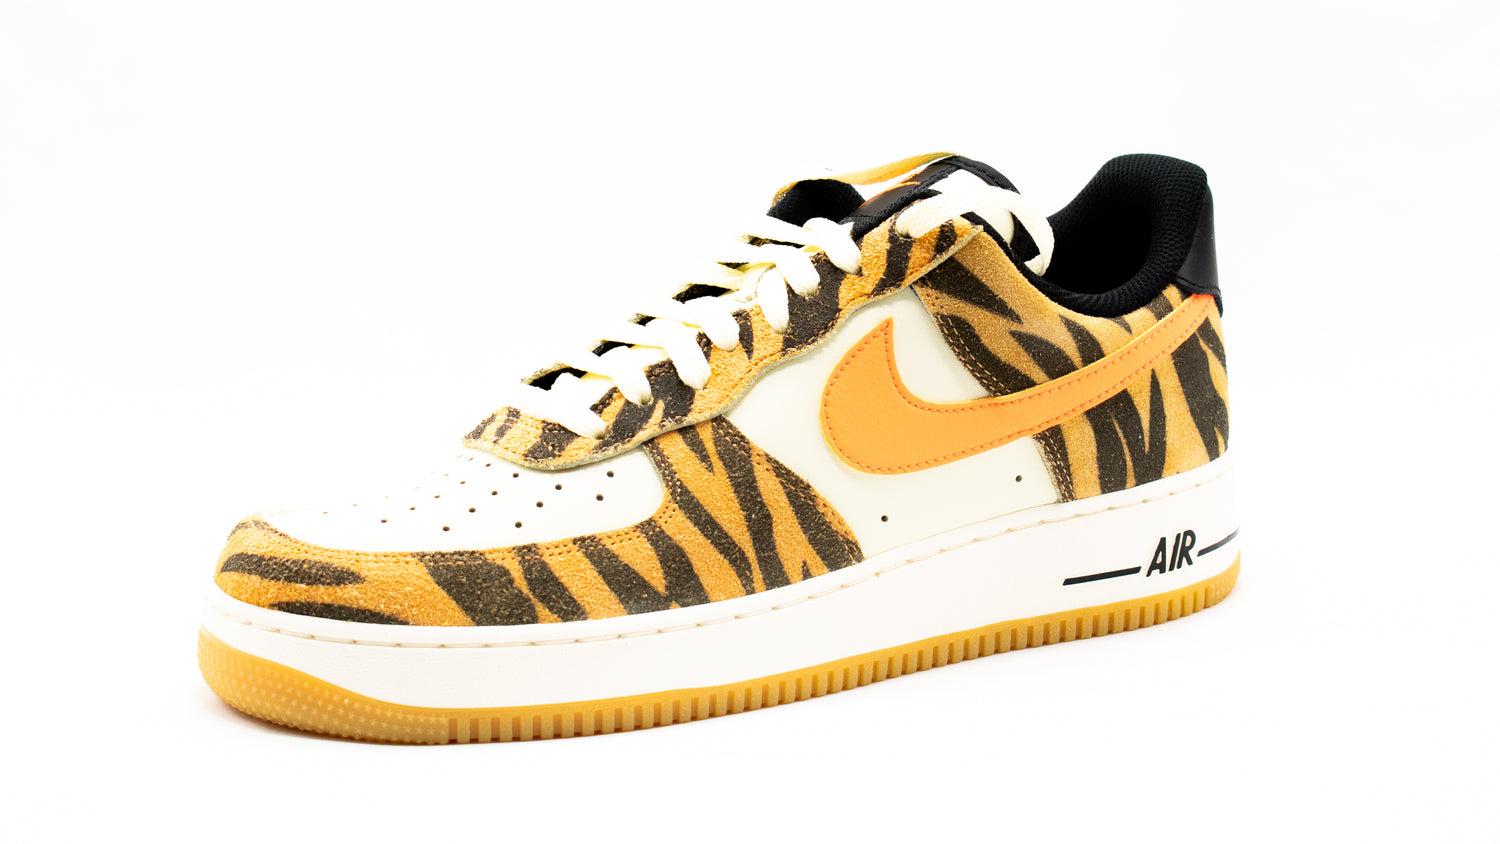 Document Kinderpaleis meester Nike Air Force 1 Low 'Dakarti' – mikesneakrs